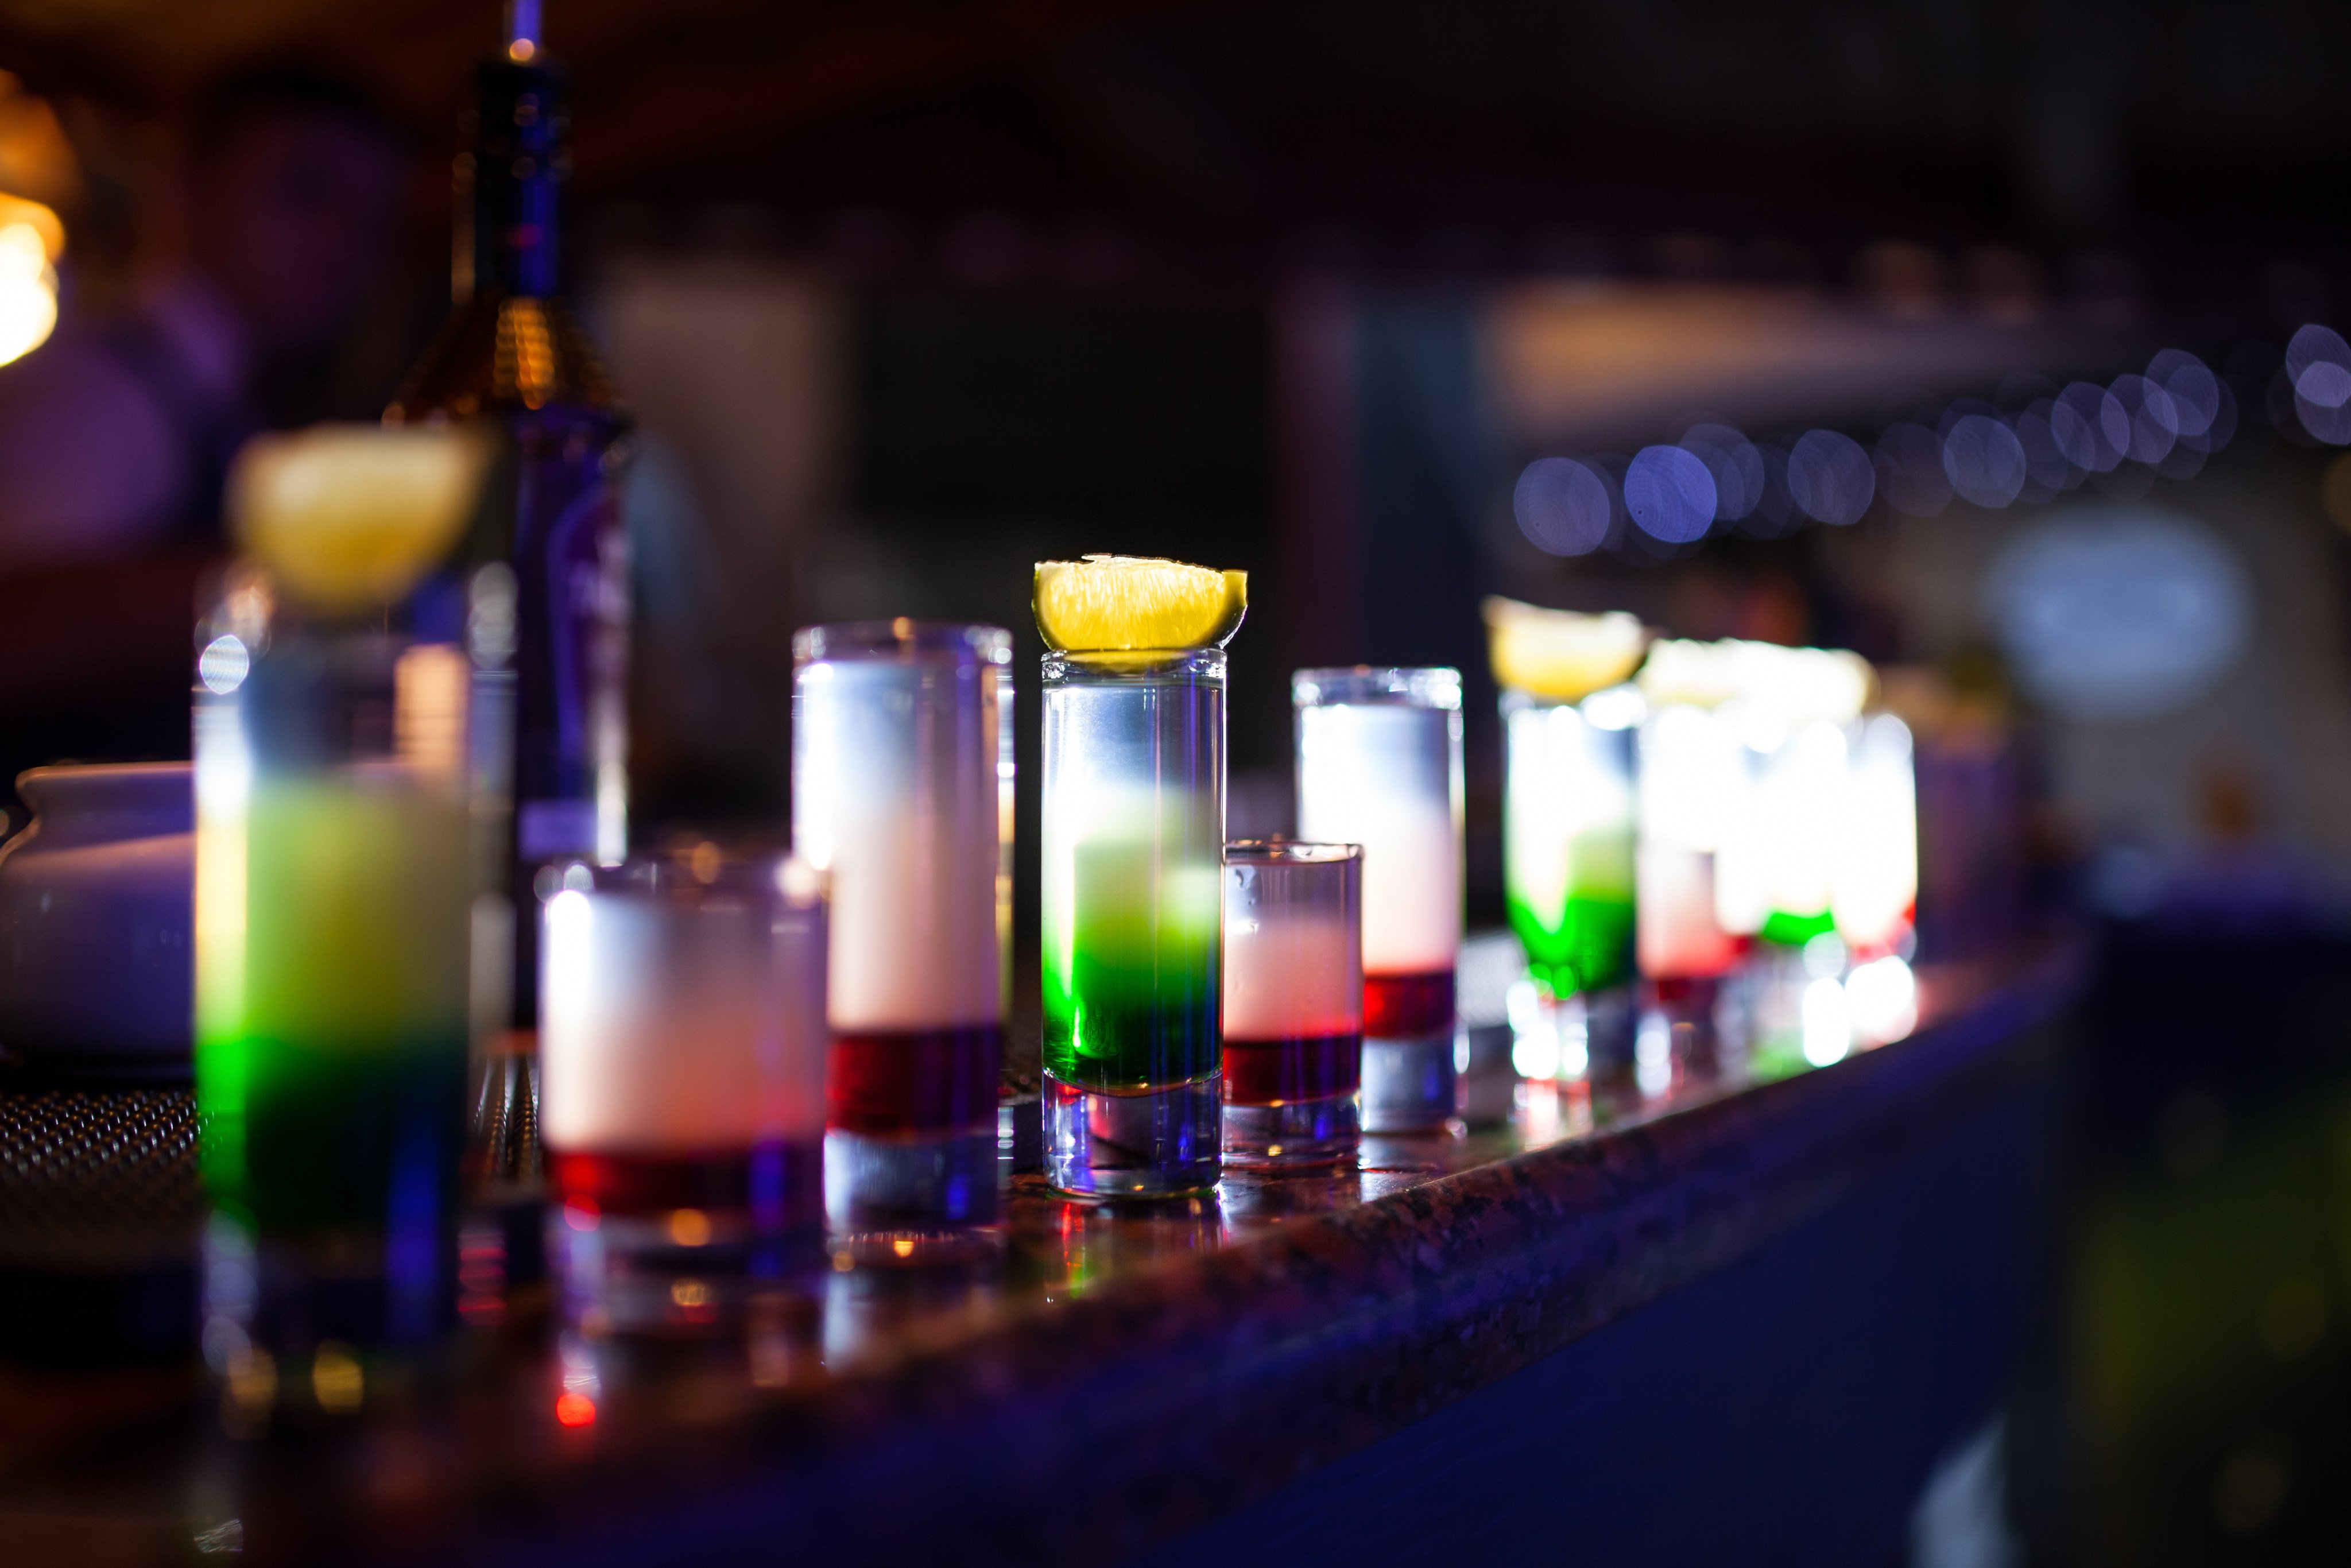 Shooters: one-shot cocktails that have been drunk in celebration since the 1970s. Photo: Shutterstock